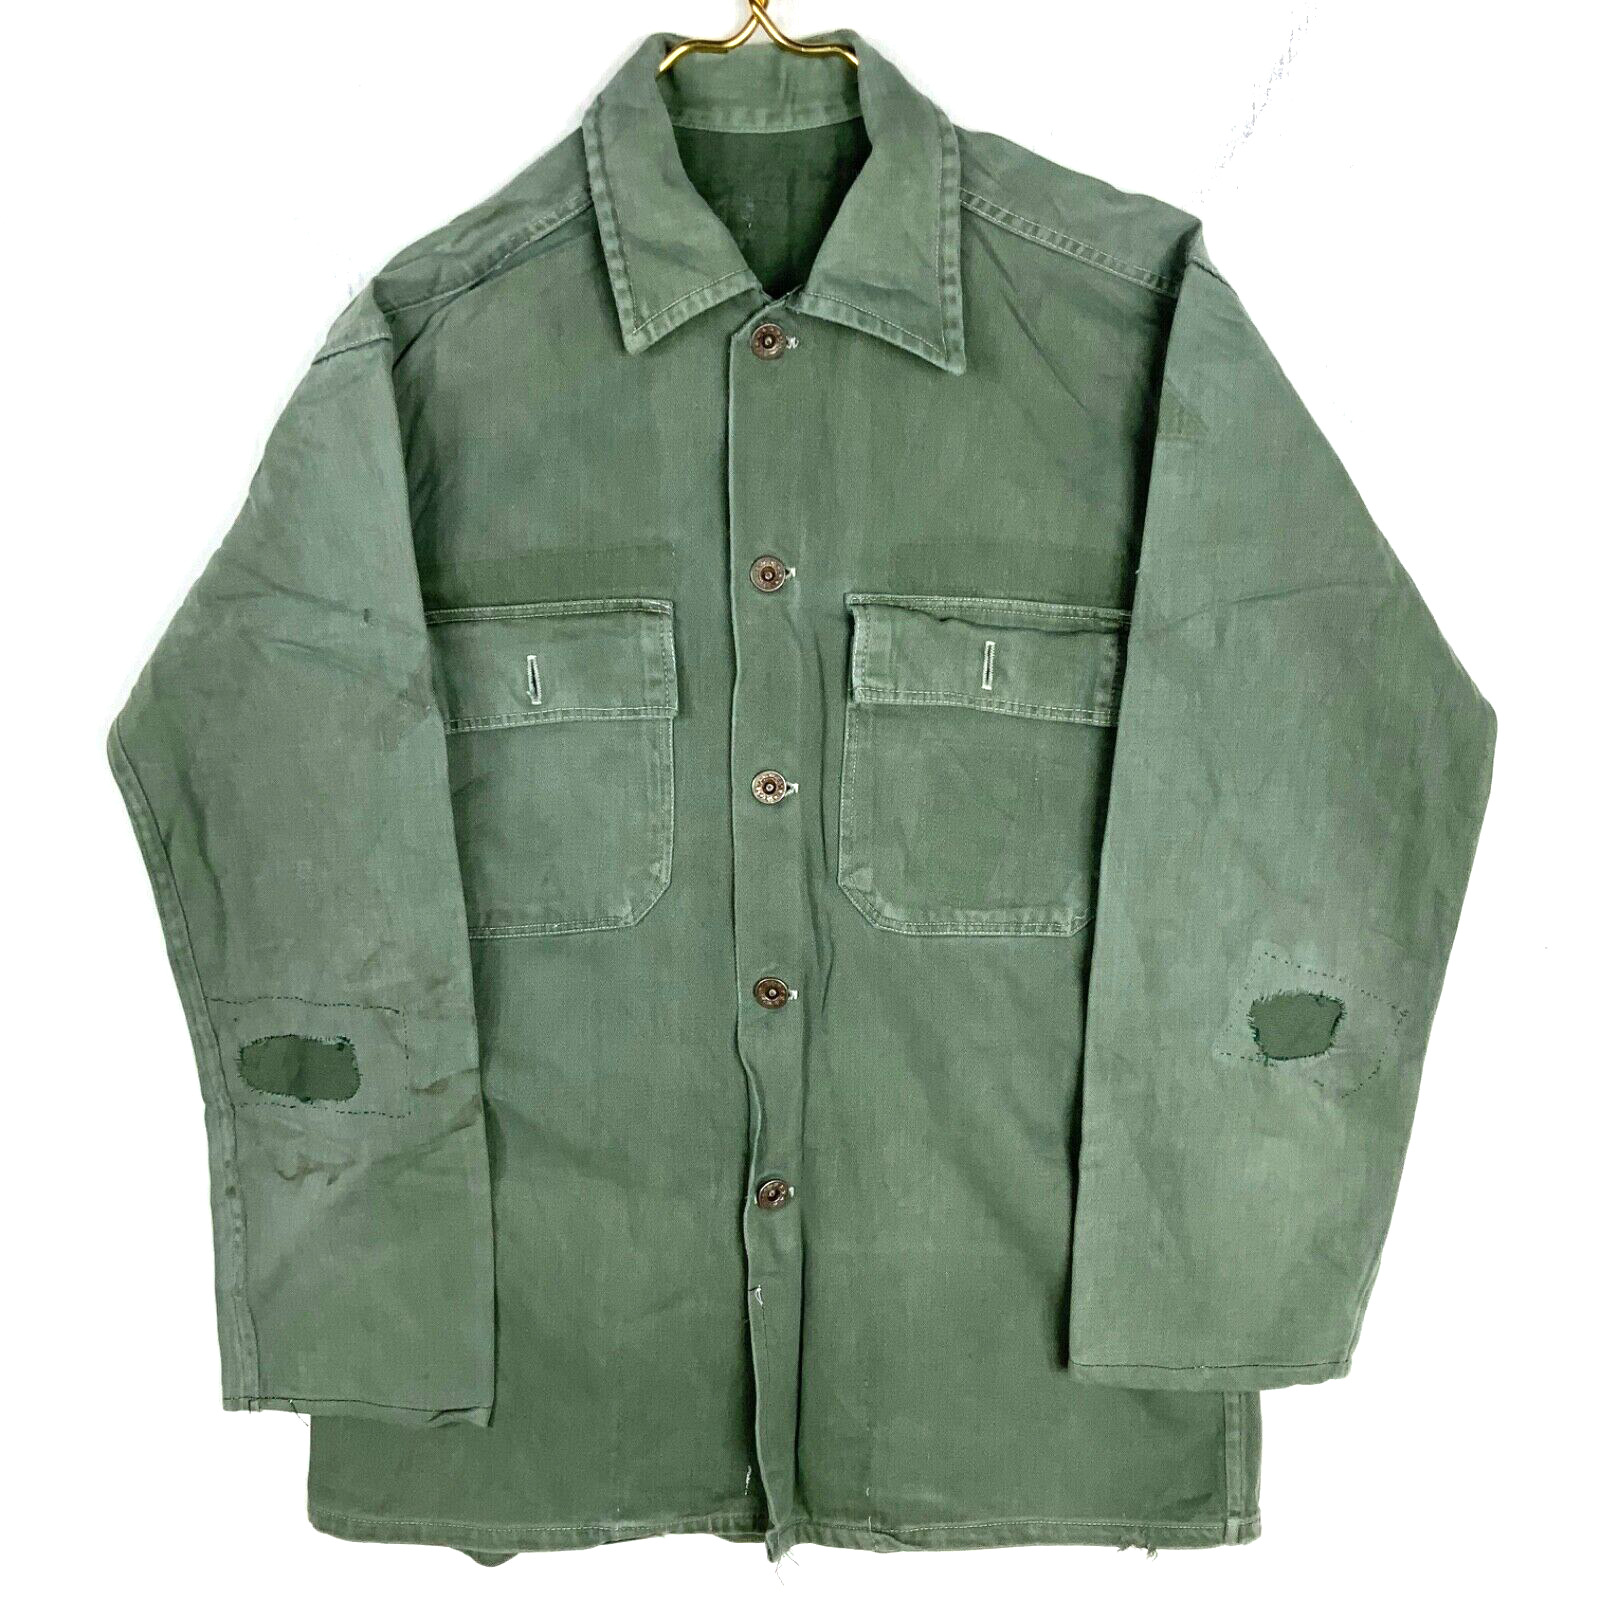 Vintage Us Army Og-107 Button Up Shirt Size Small Green 40s 50s